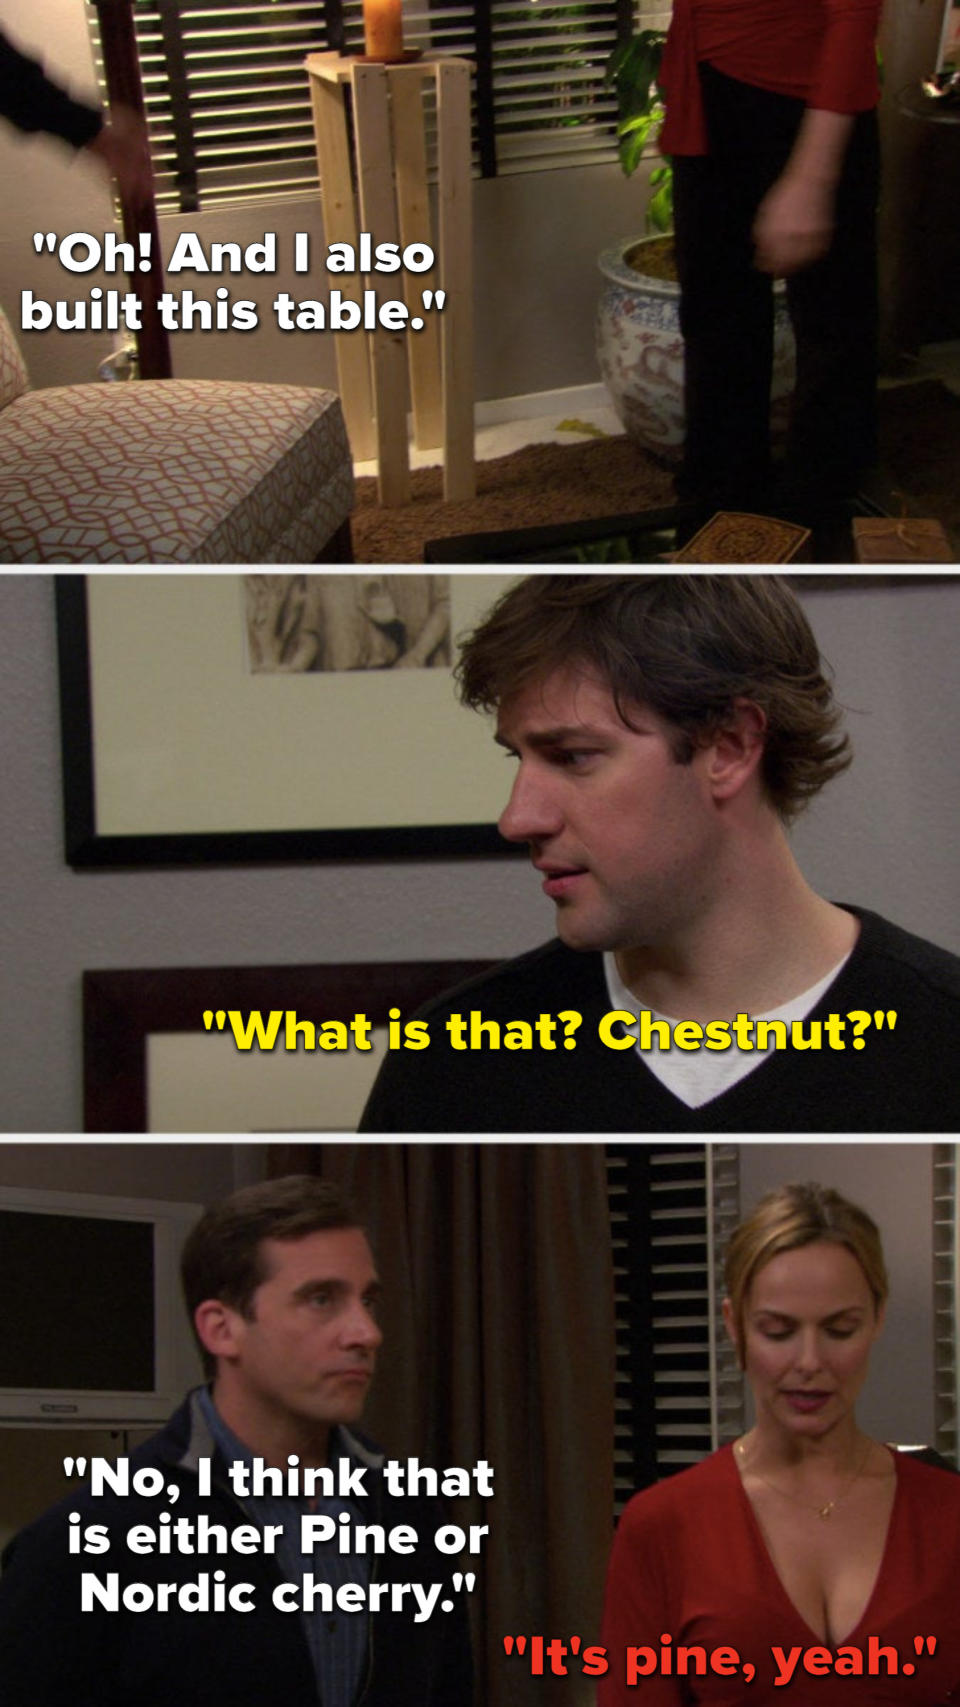 Michael points to a poorly made small table and says, Oh and I also built this table, Jim asks, What is that? Chestnut, Michael says, No, I think that is either Pine or Nordic cherry, and Jan says, It's pine, yeah